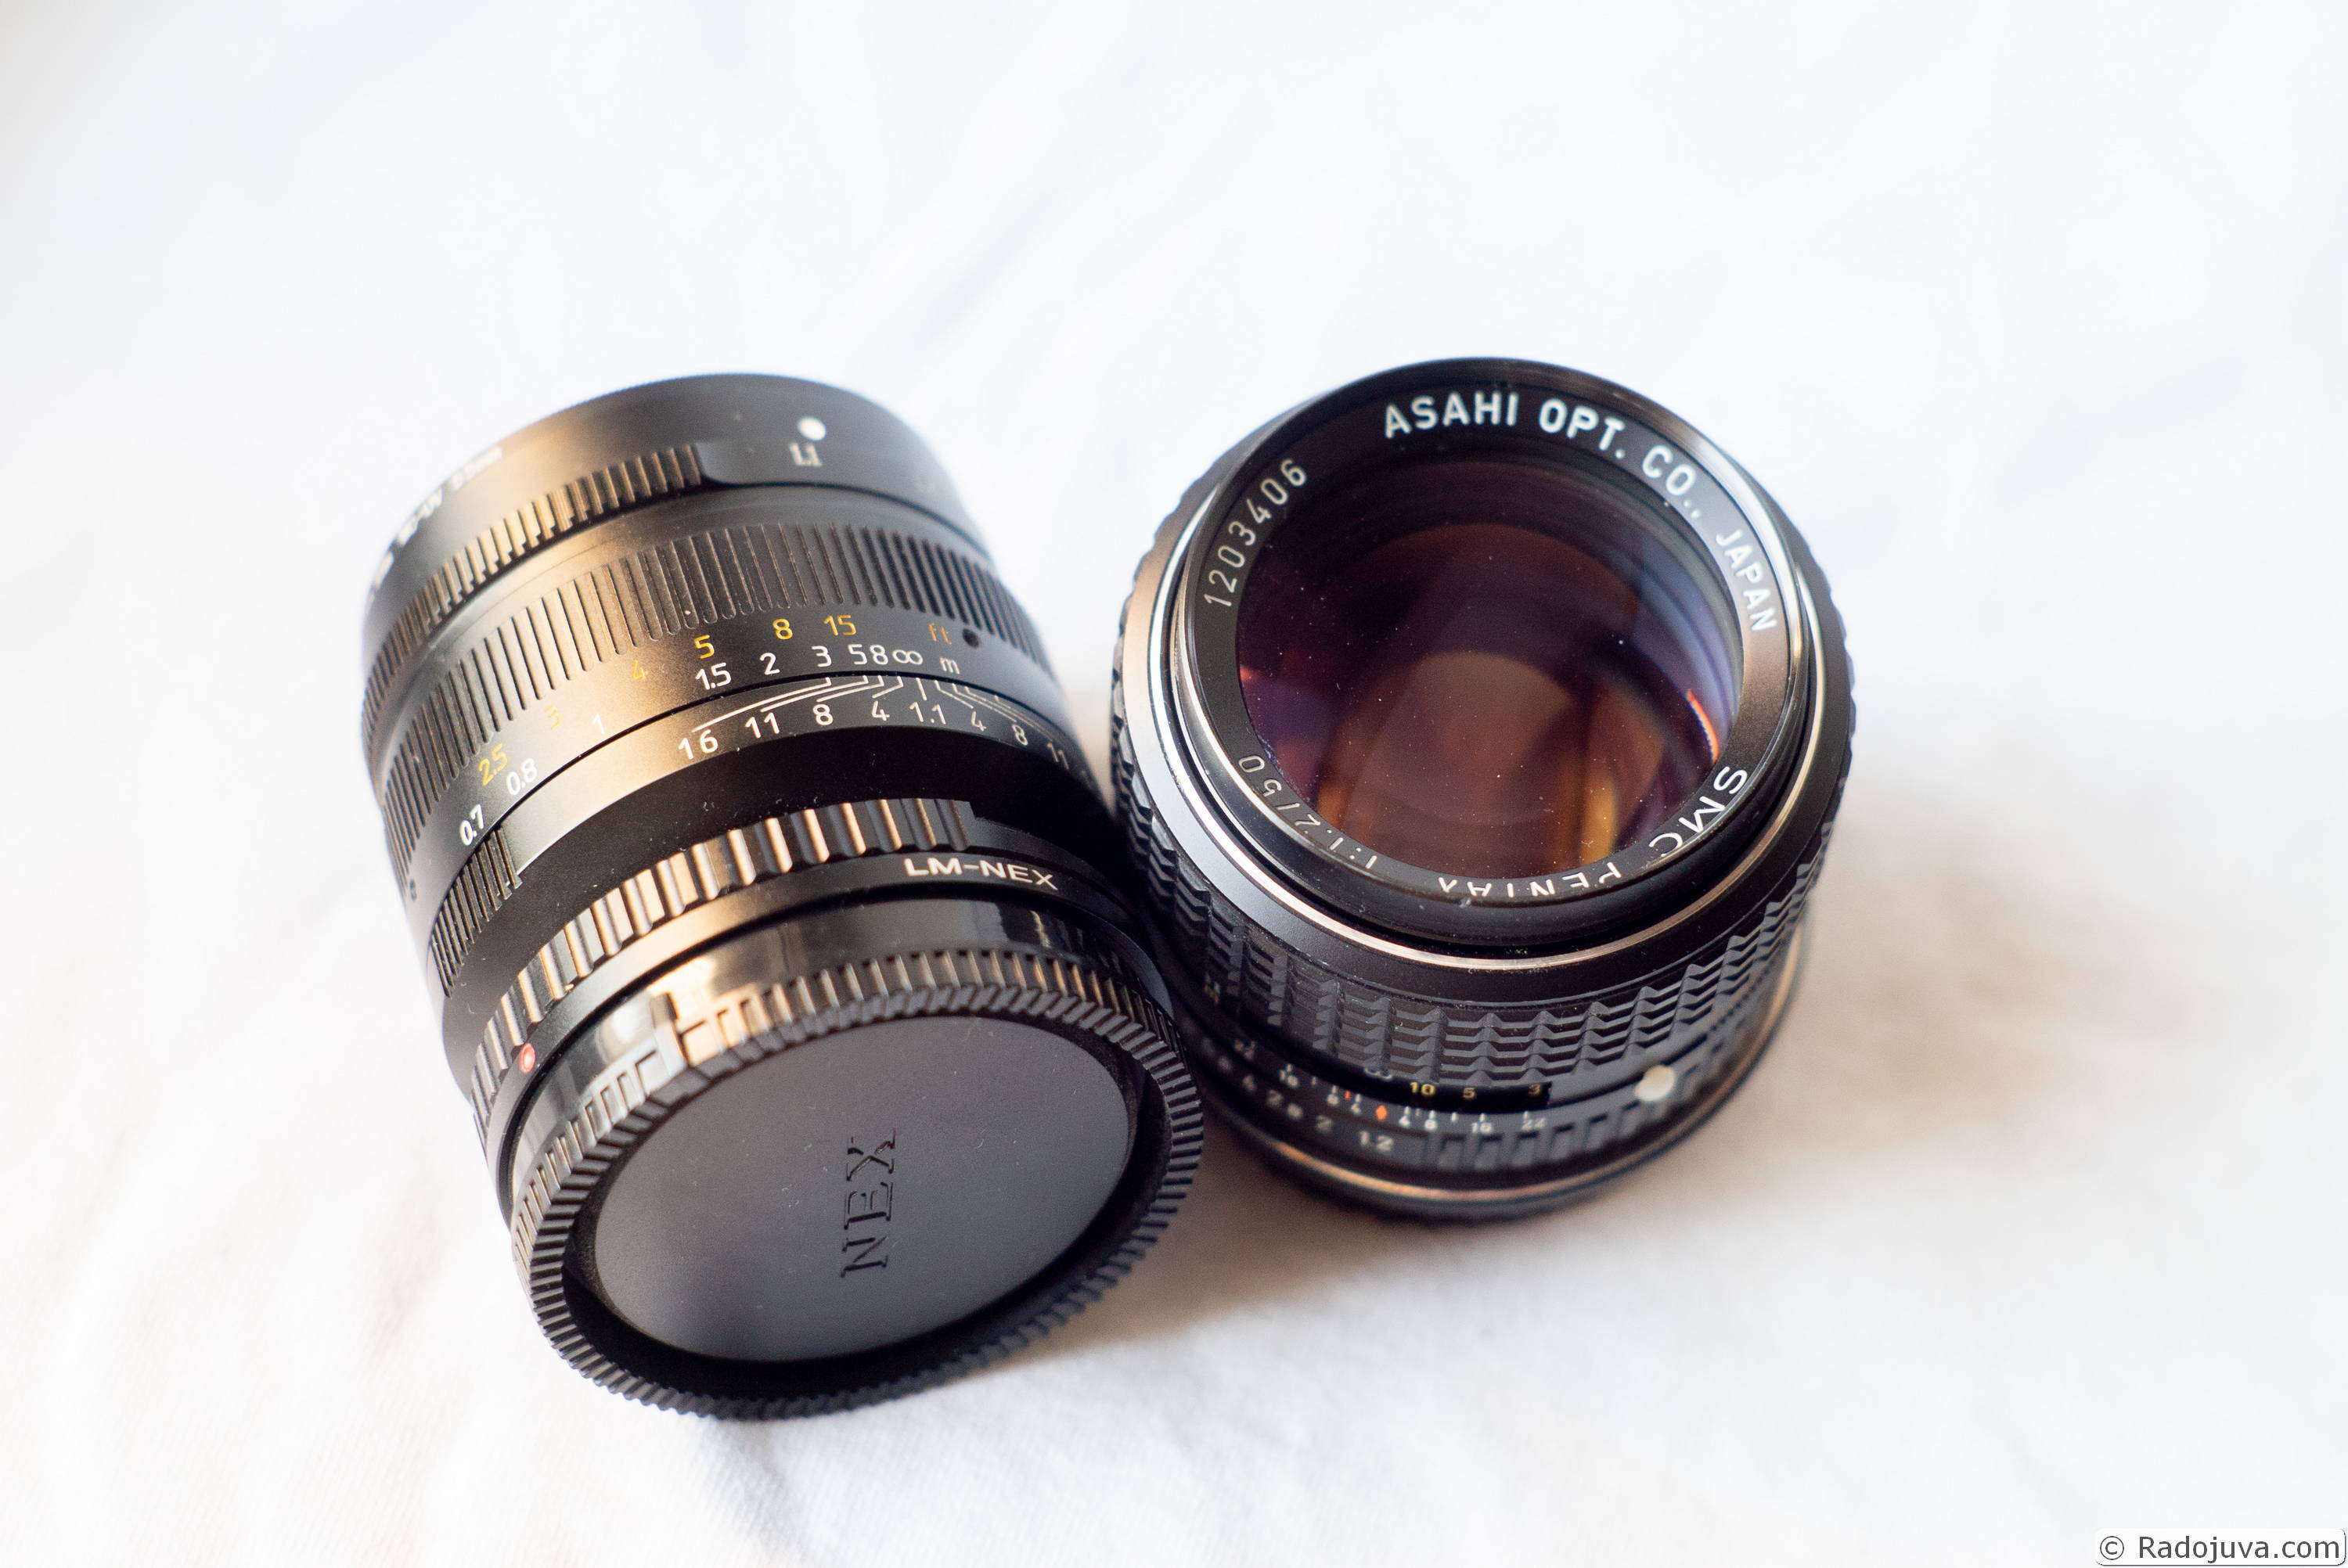 7artisans 50 / 1.1 and SMC Pentax 50 / 1.2: the lenses themselves are similar in size, but the total length of the optical system for a lens for a SLR camera is longer.